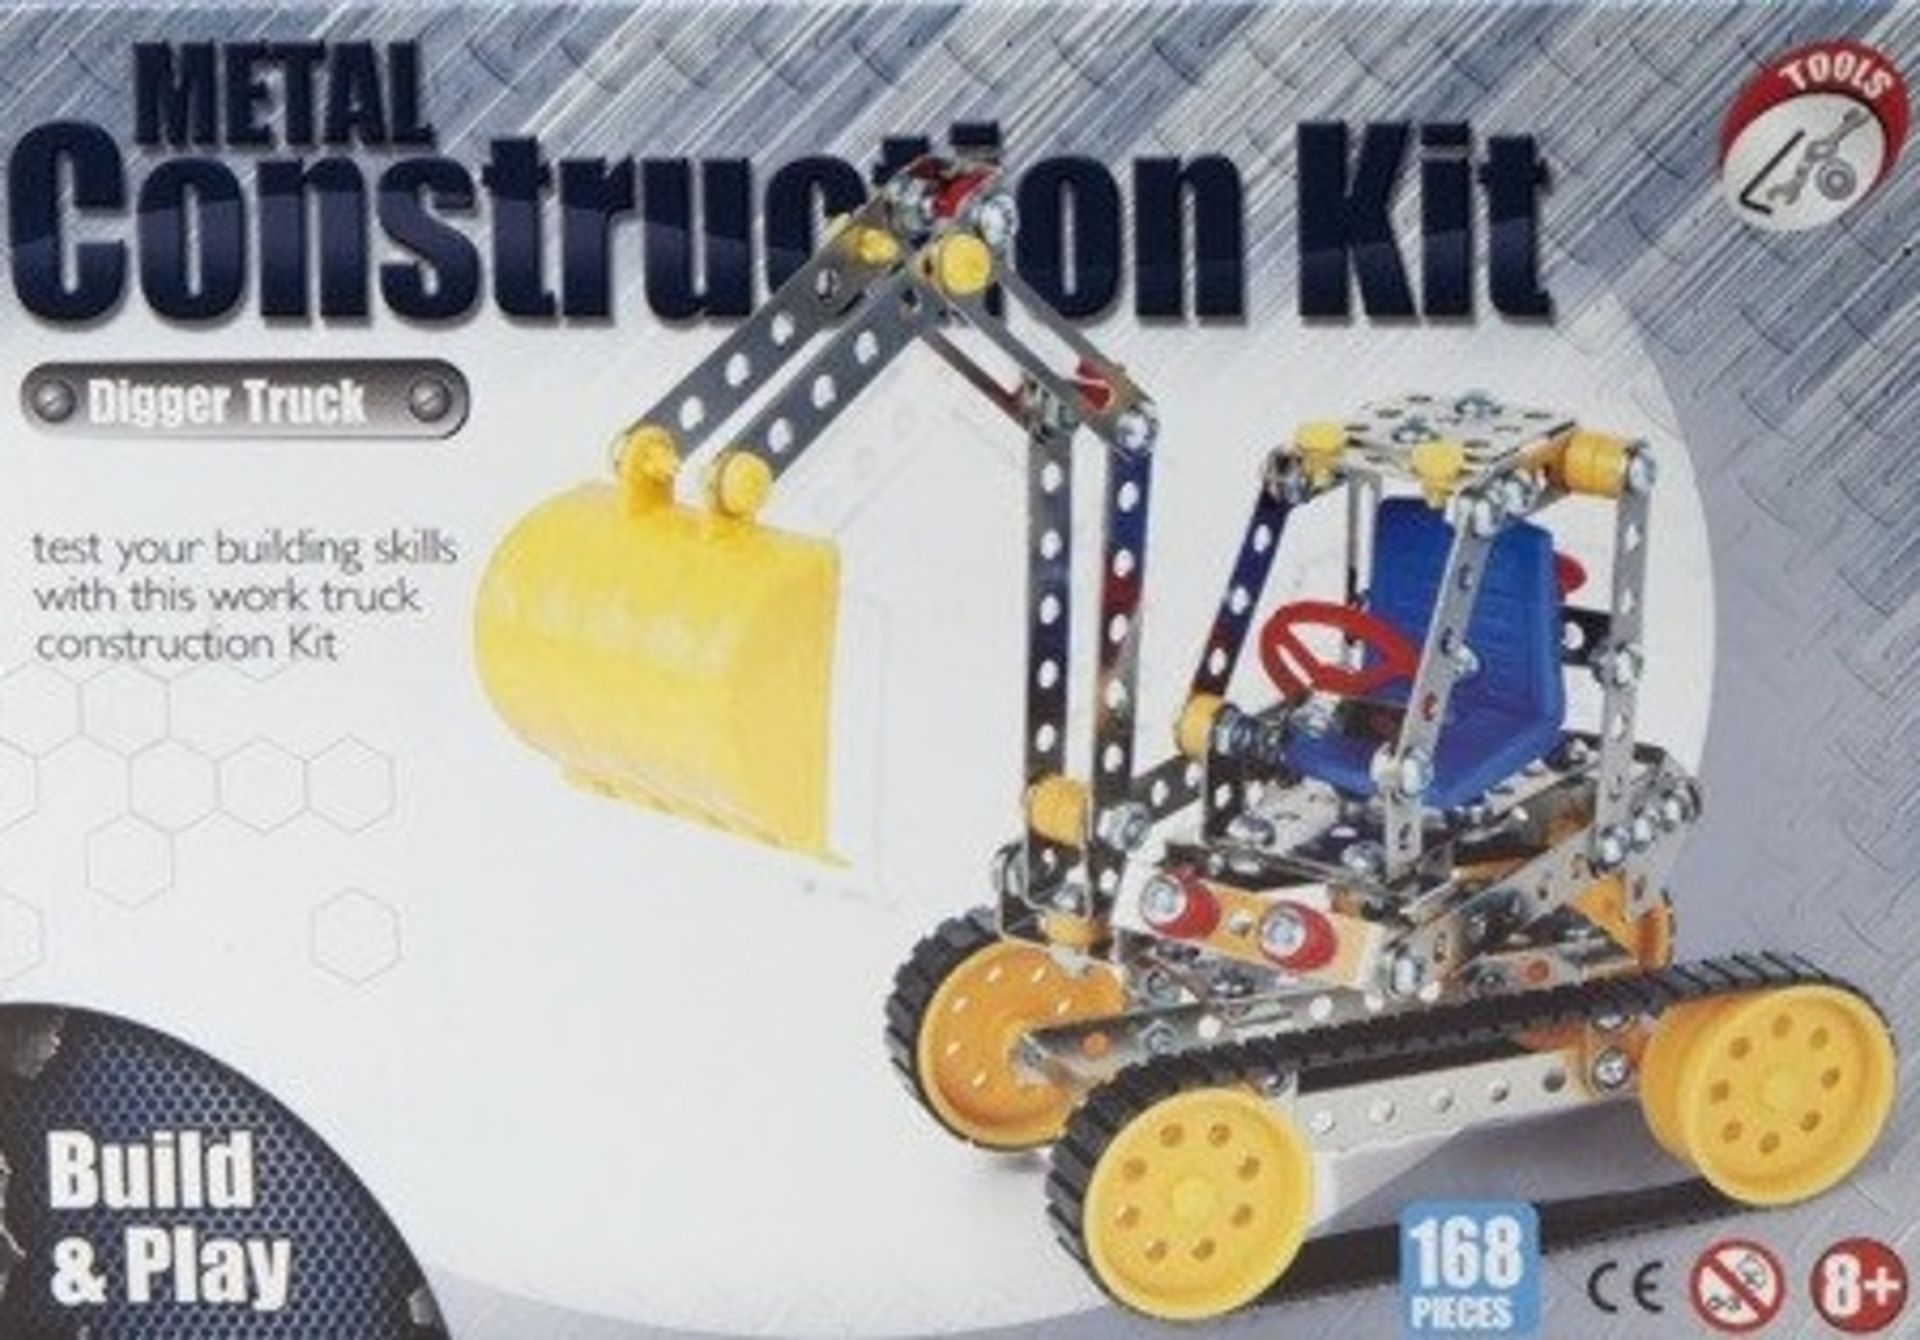 V Brand New Metal Construction Kit Digger Truck With 168pcs and Tools X 2 YOUR BID PRICE TO BE